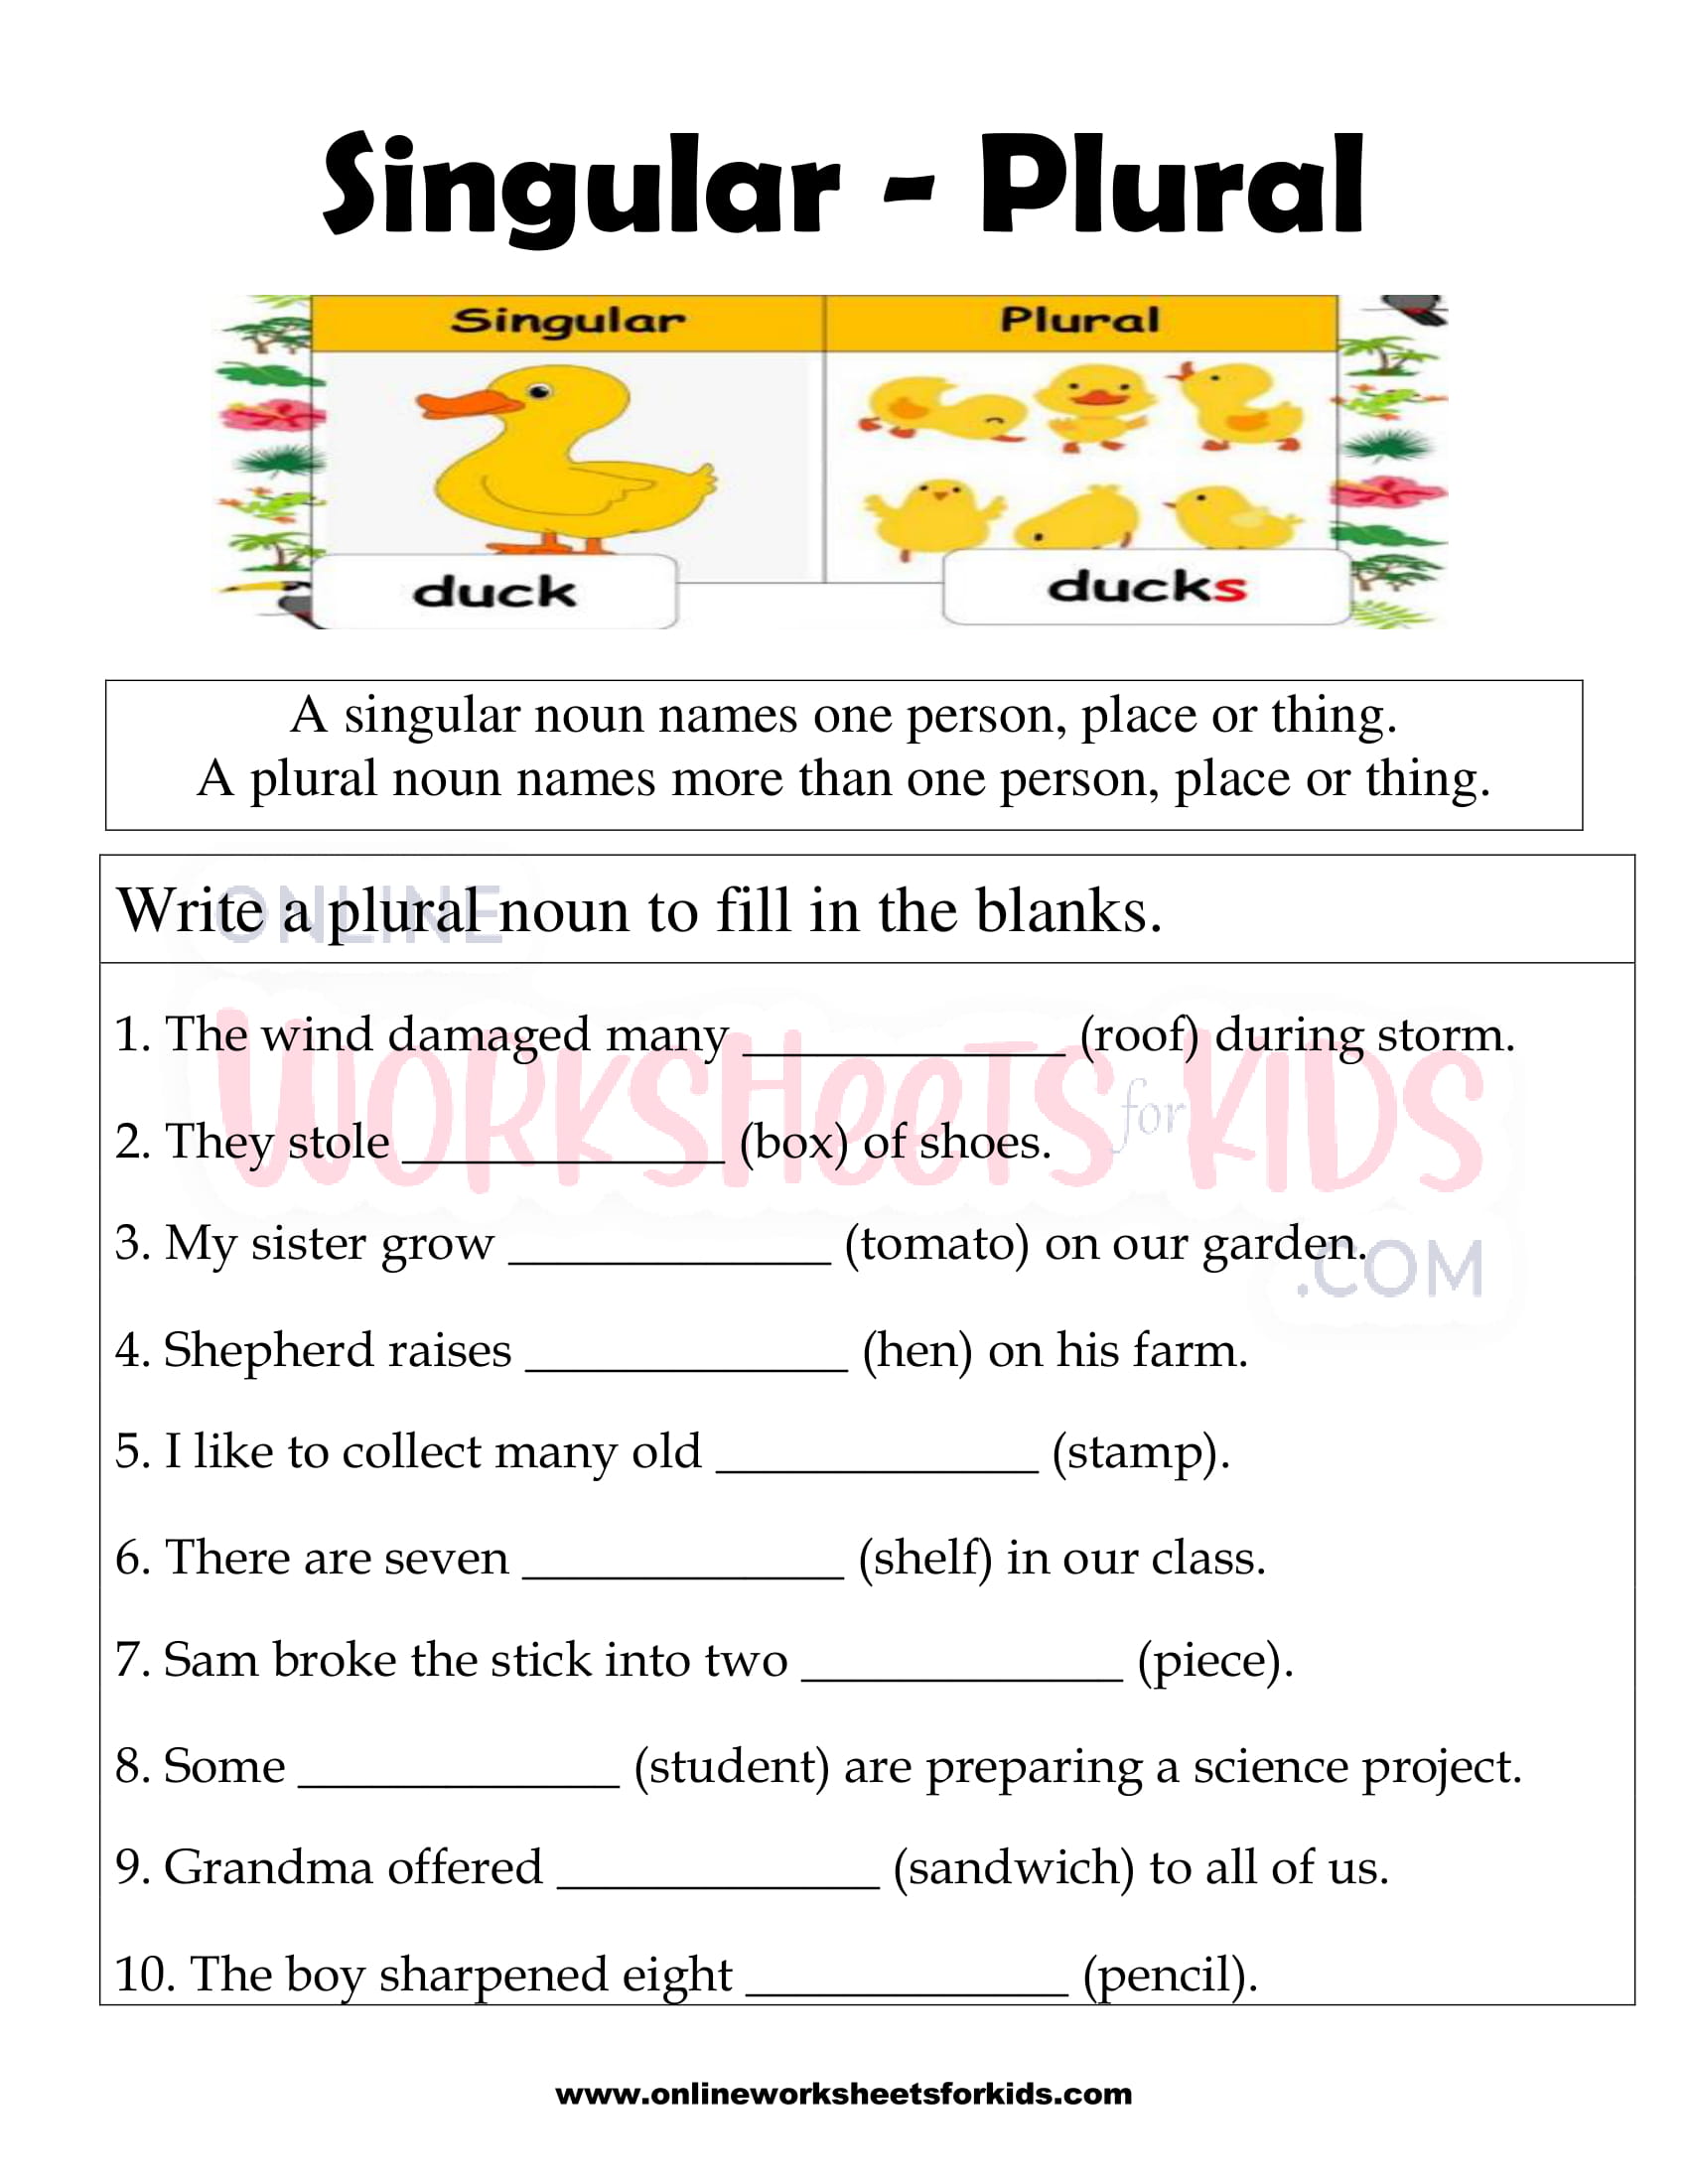 Worksheet On Singular And Plural Nouns For Class 3